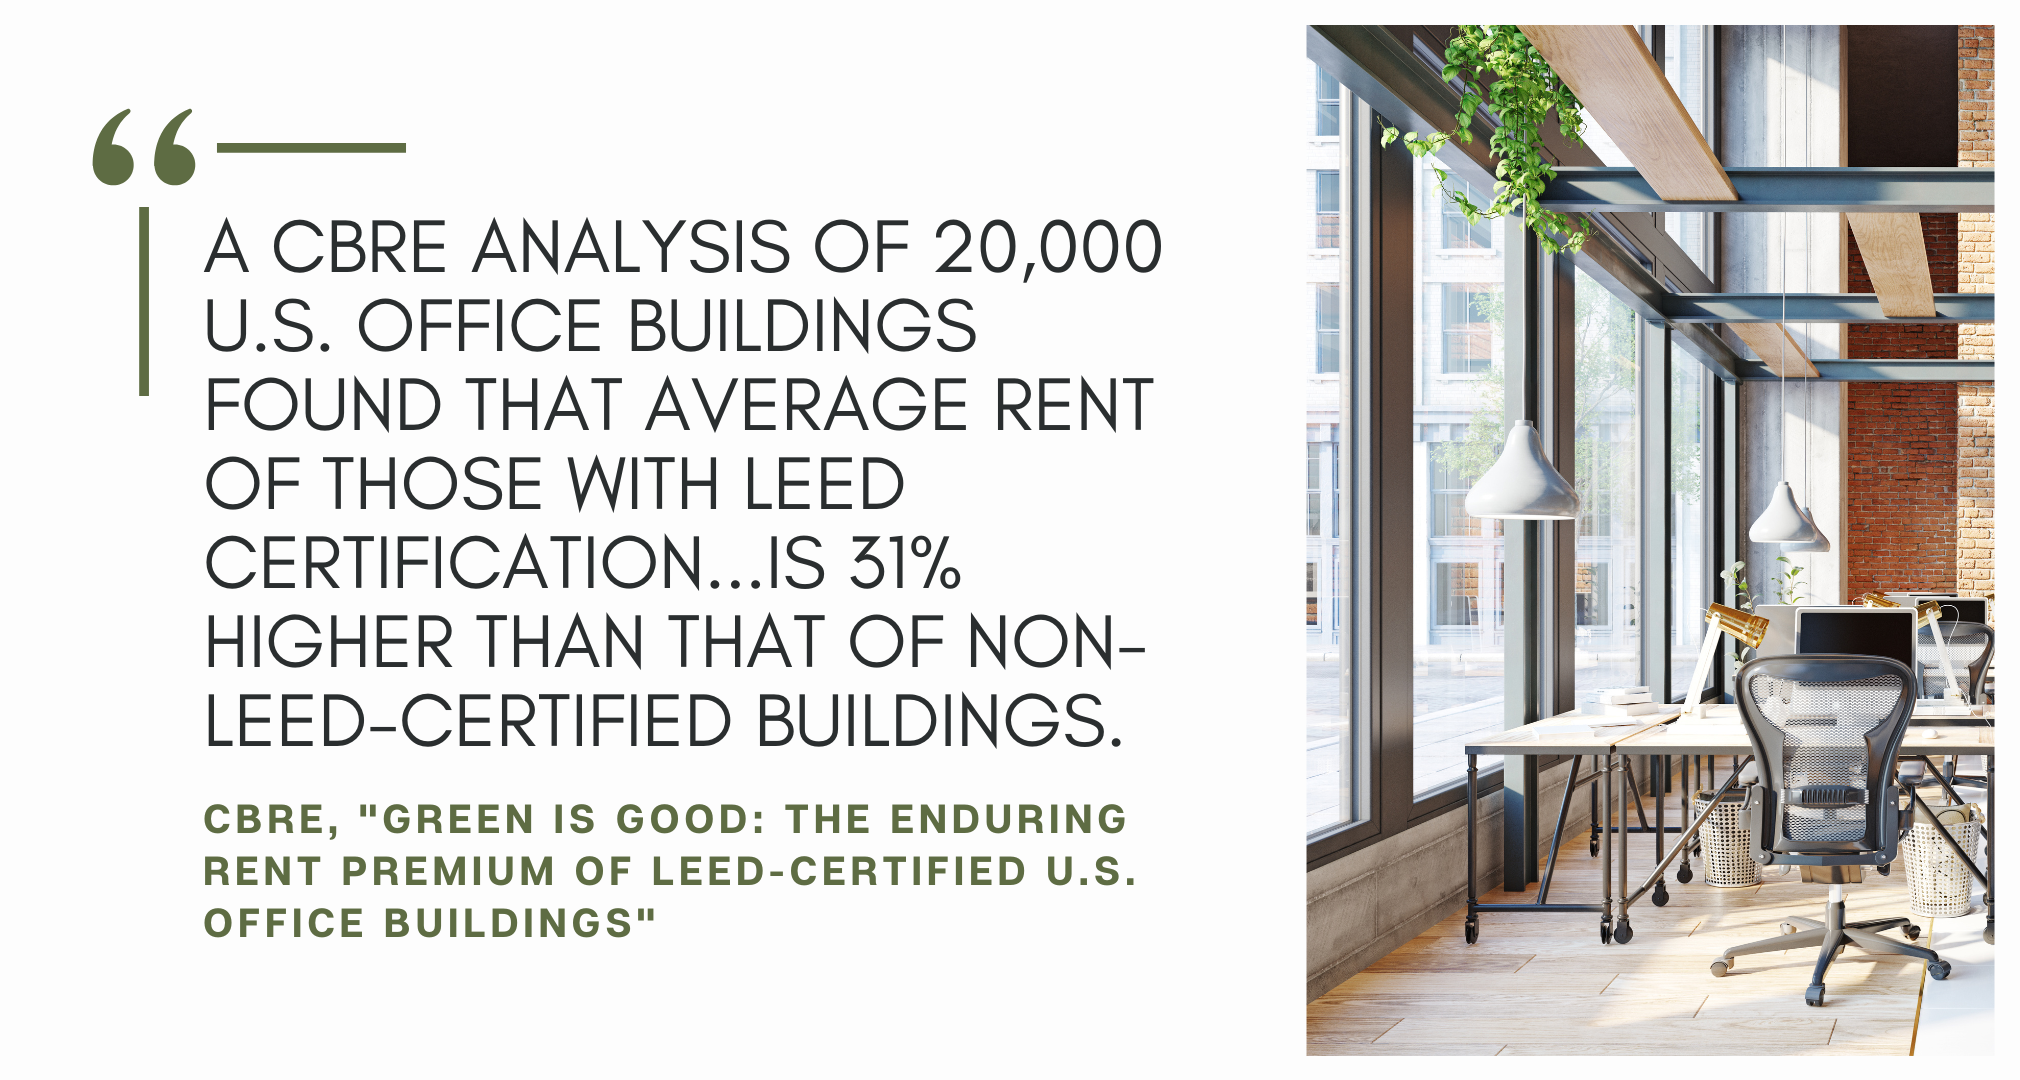 sustainable buildings also tend to achieve higher rental rates and sale prices